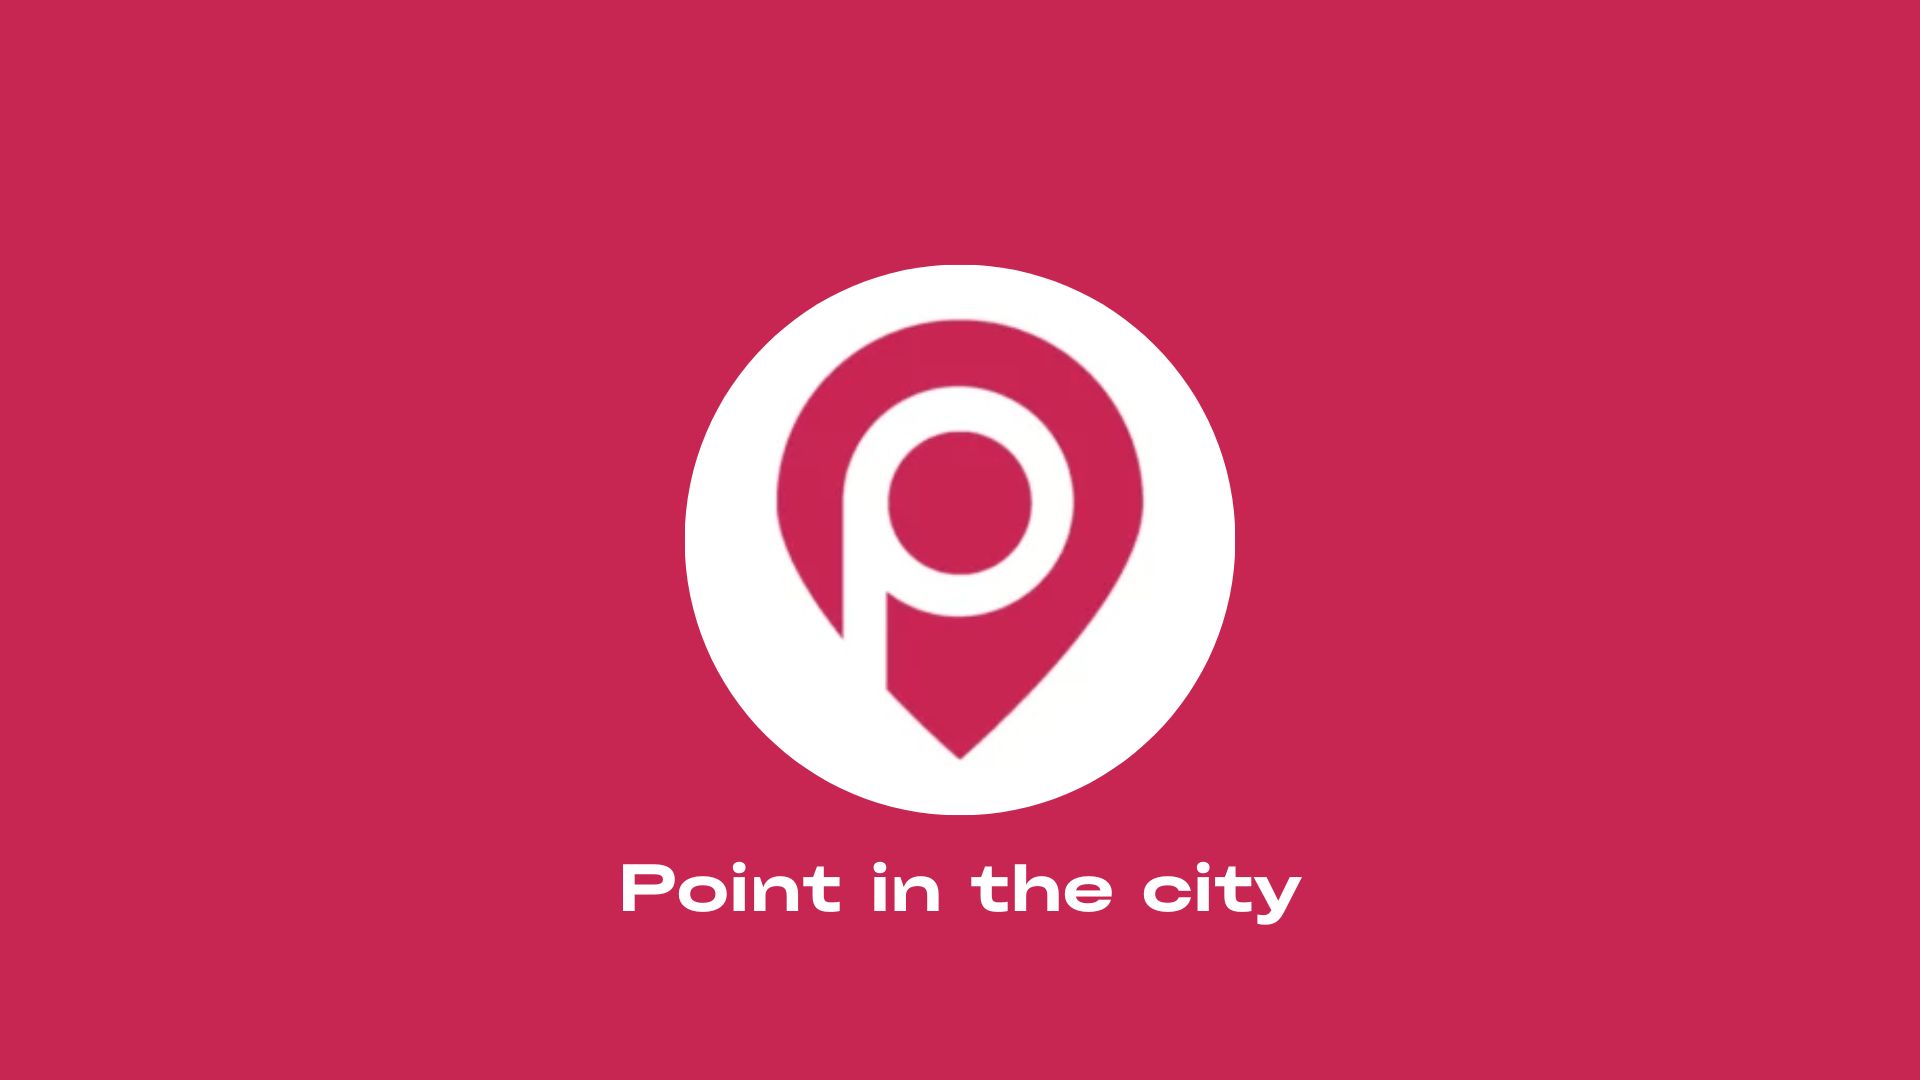 Point in the city